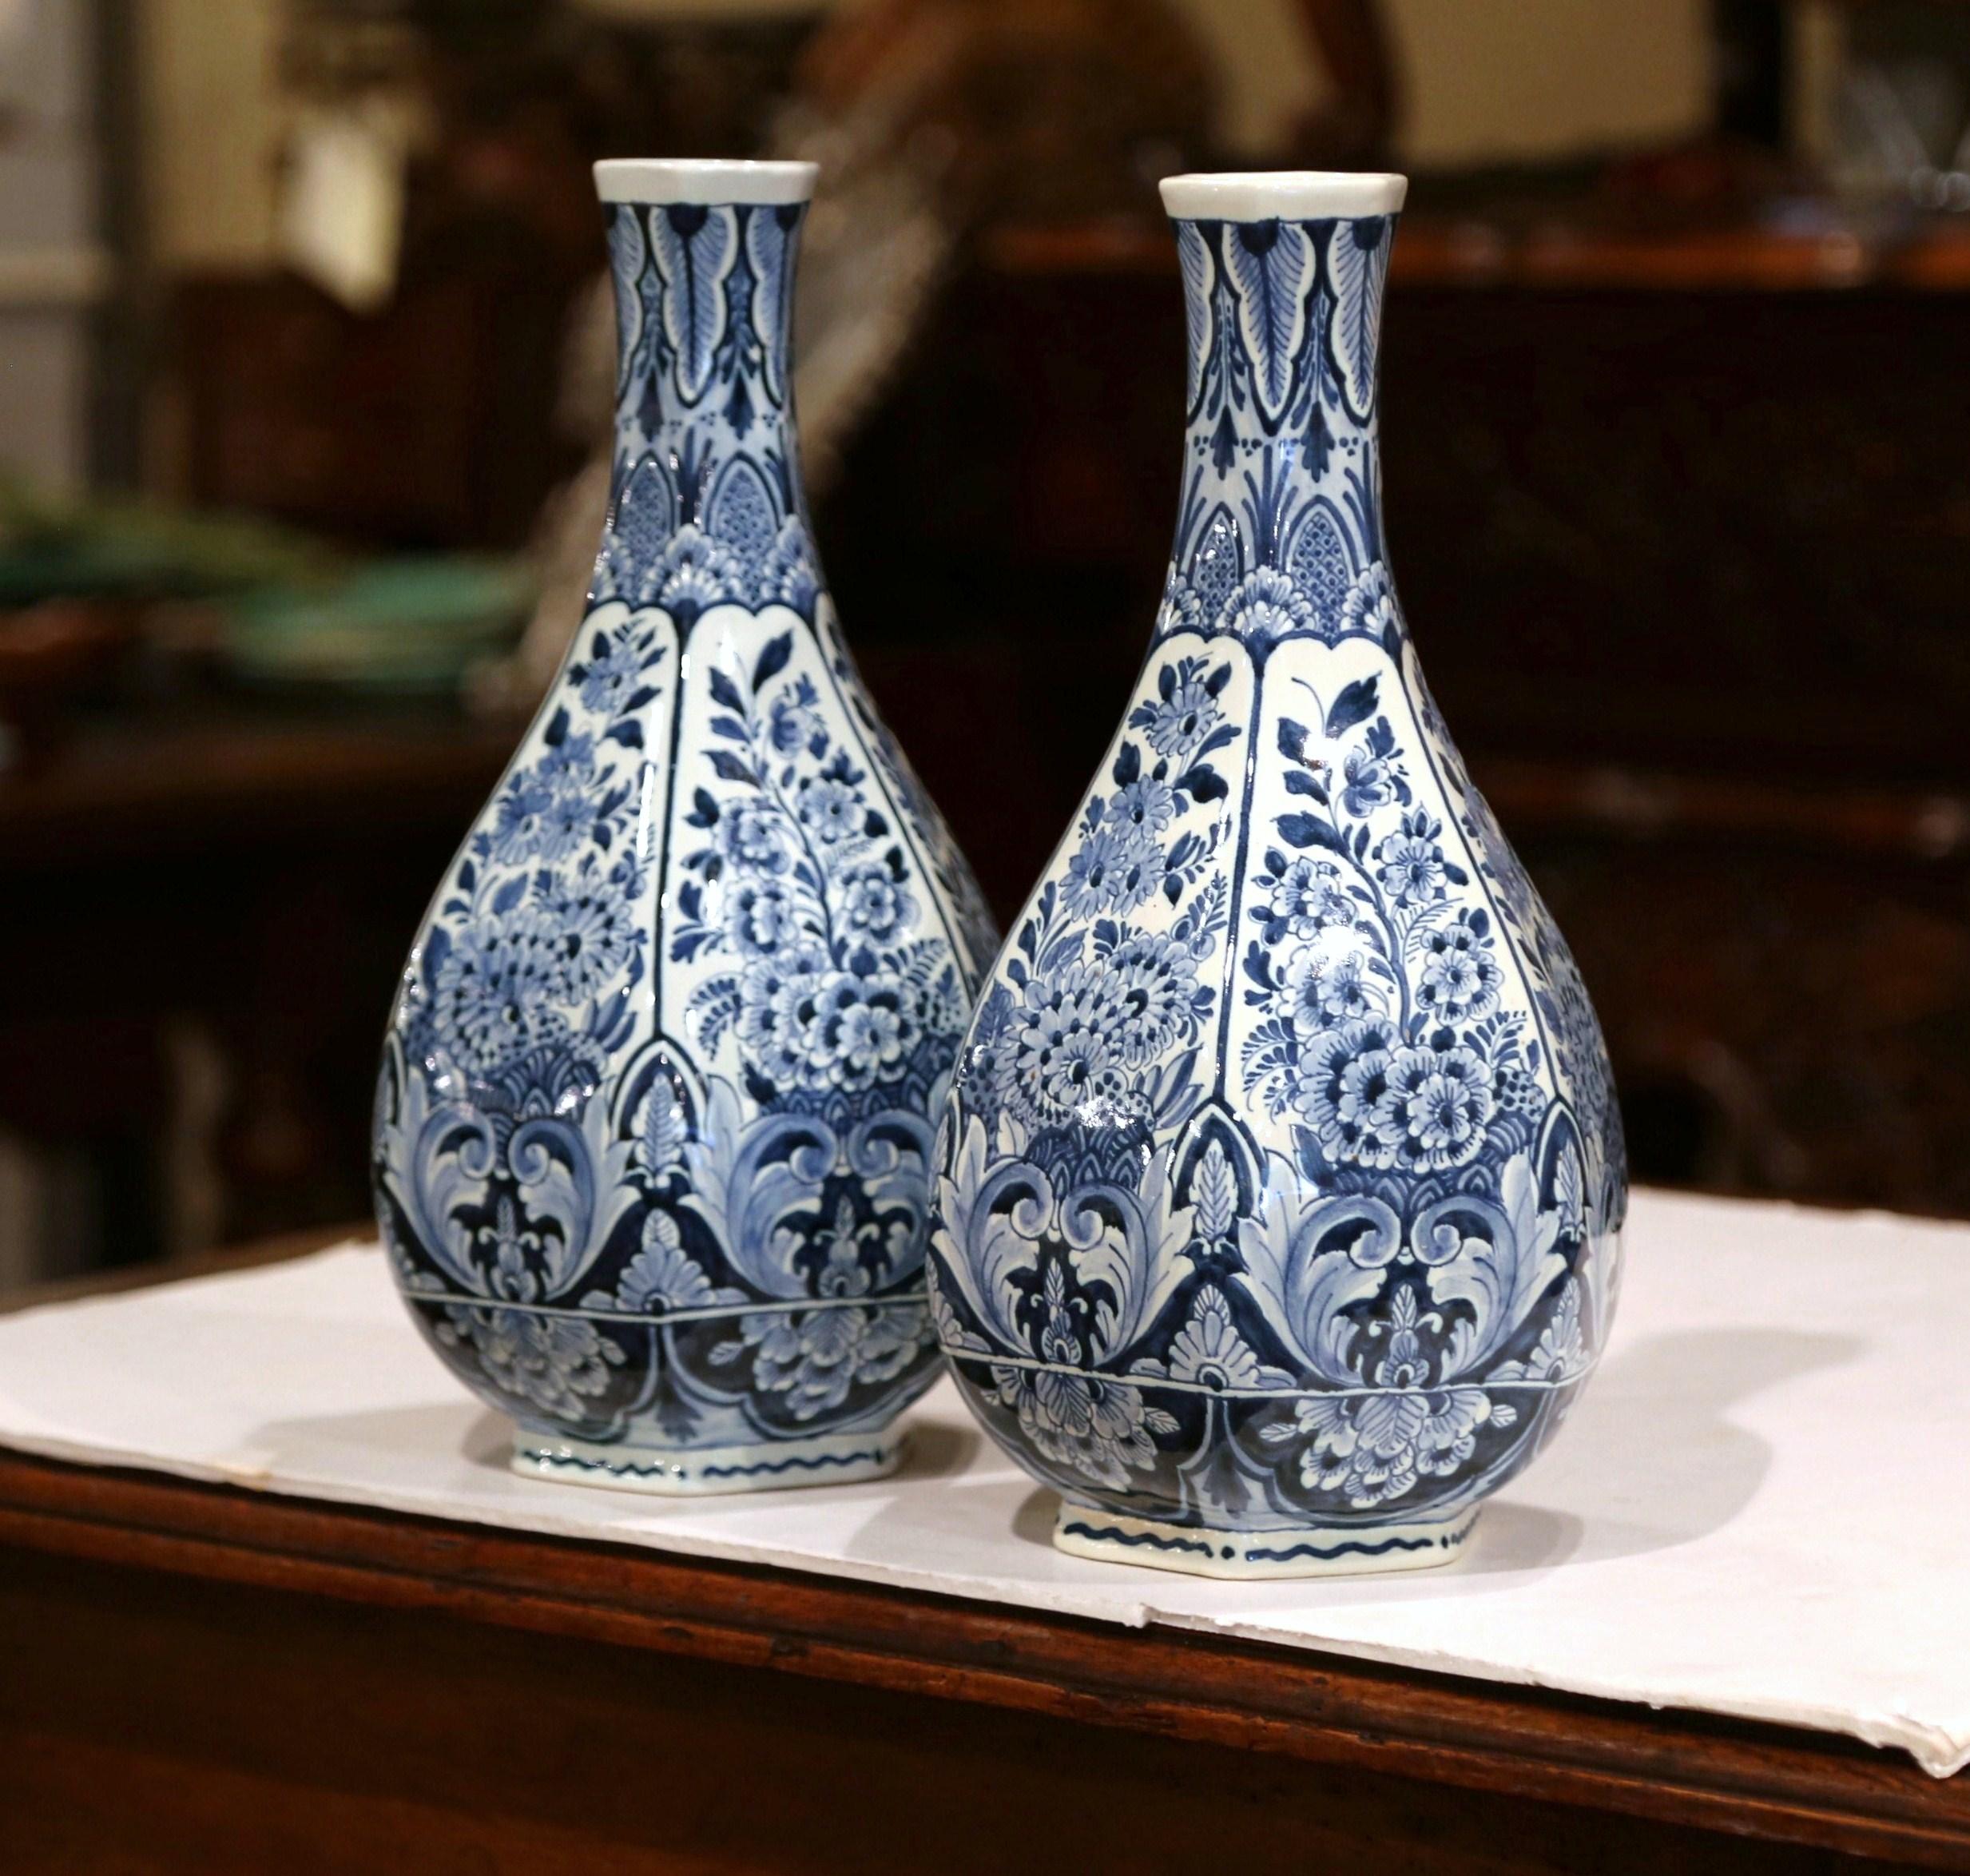 This vintage pair of ceramic delft vases was created in Holland, circa 1950. Hexagonal in shape with a tall and narrow neck, the flower vases feature traditional hand painted floral and leaf decorations in a Classic navy blue and white palette. Both